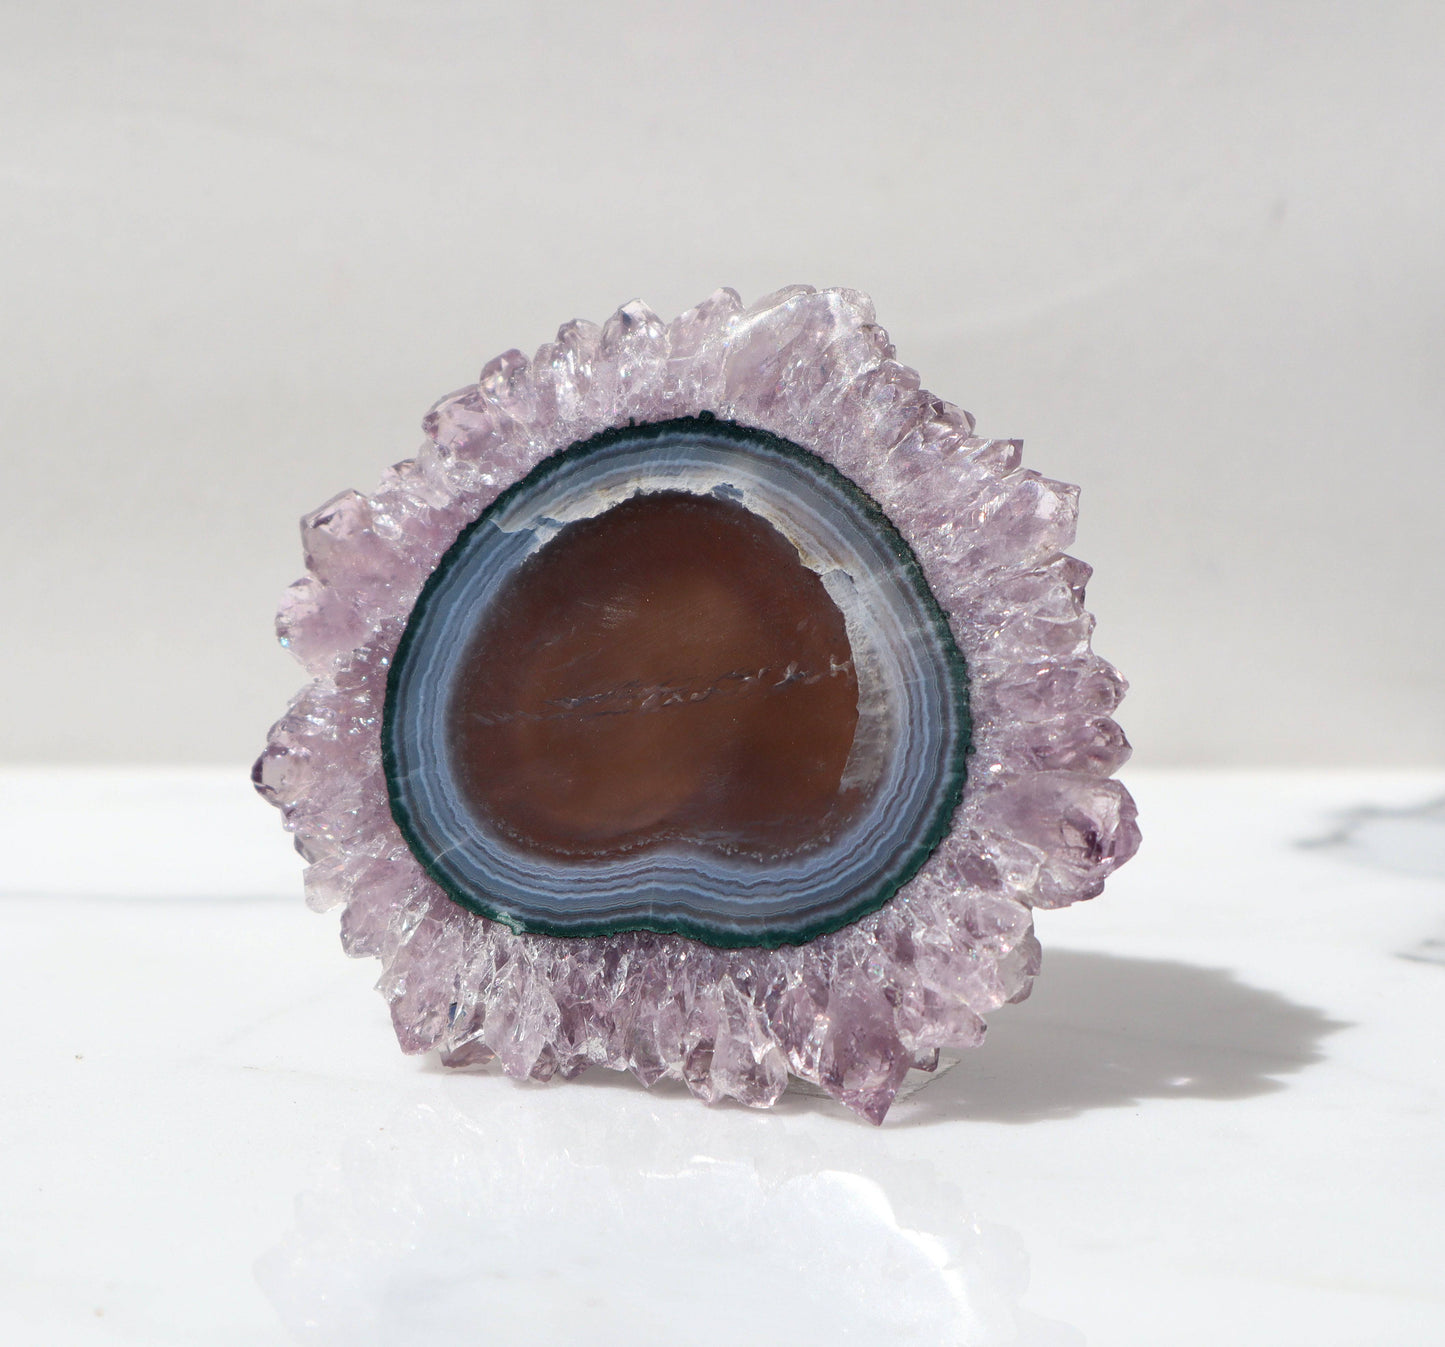 Grand stalactite slice. Flower-resembling formation, nature-made of hearth tone agate with bands of blue and green jasper. Bordering this glee is a thick and graceful layer of large lavender color quartz crystals.